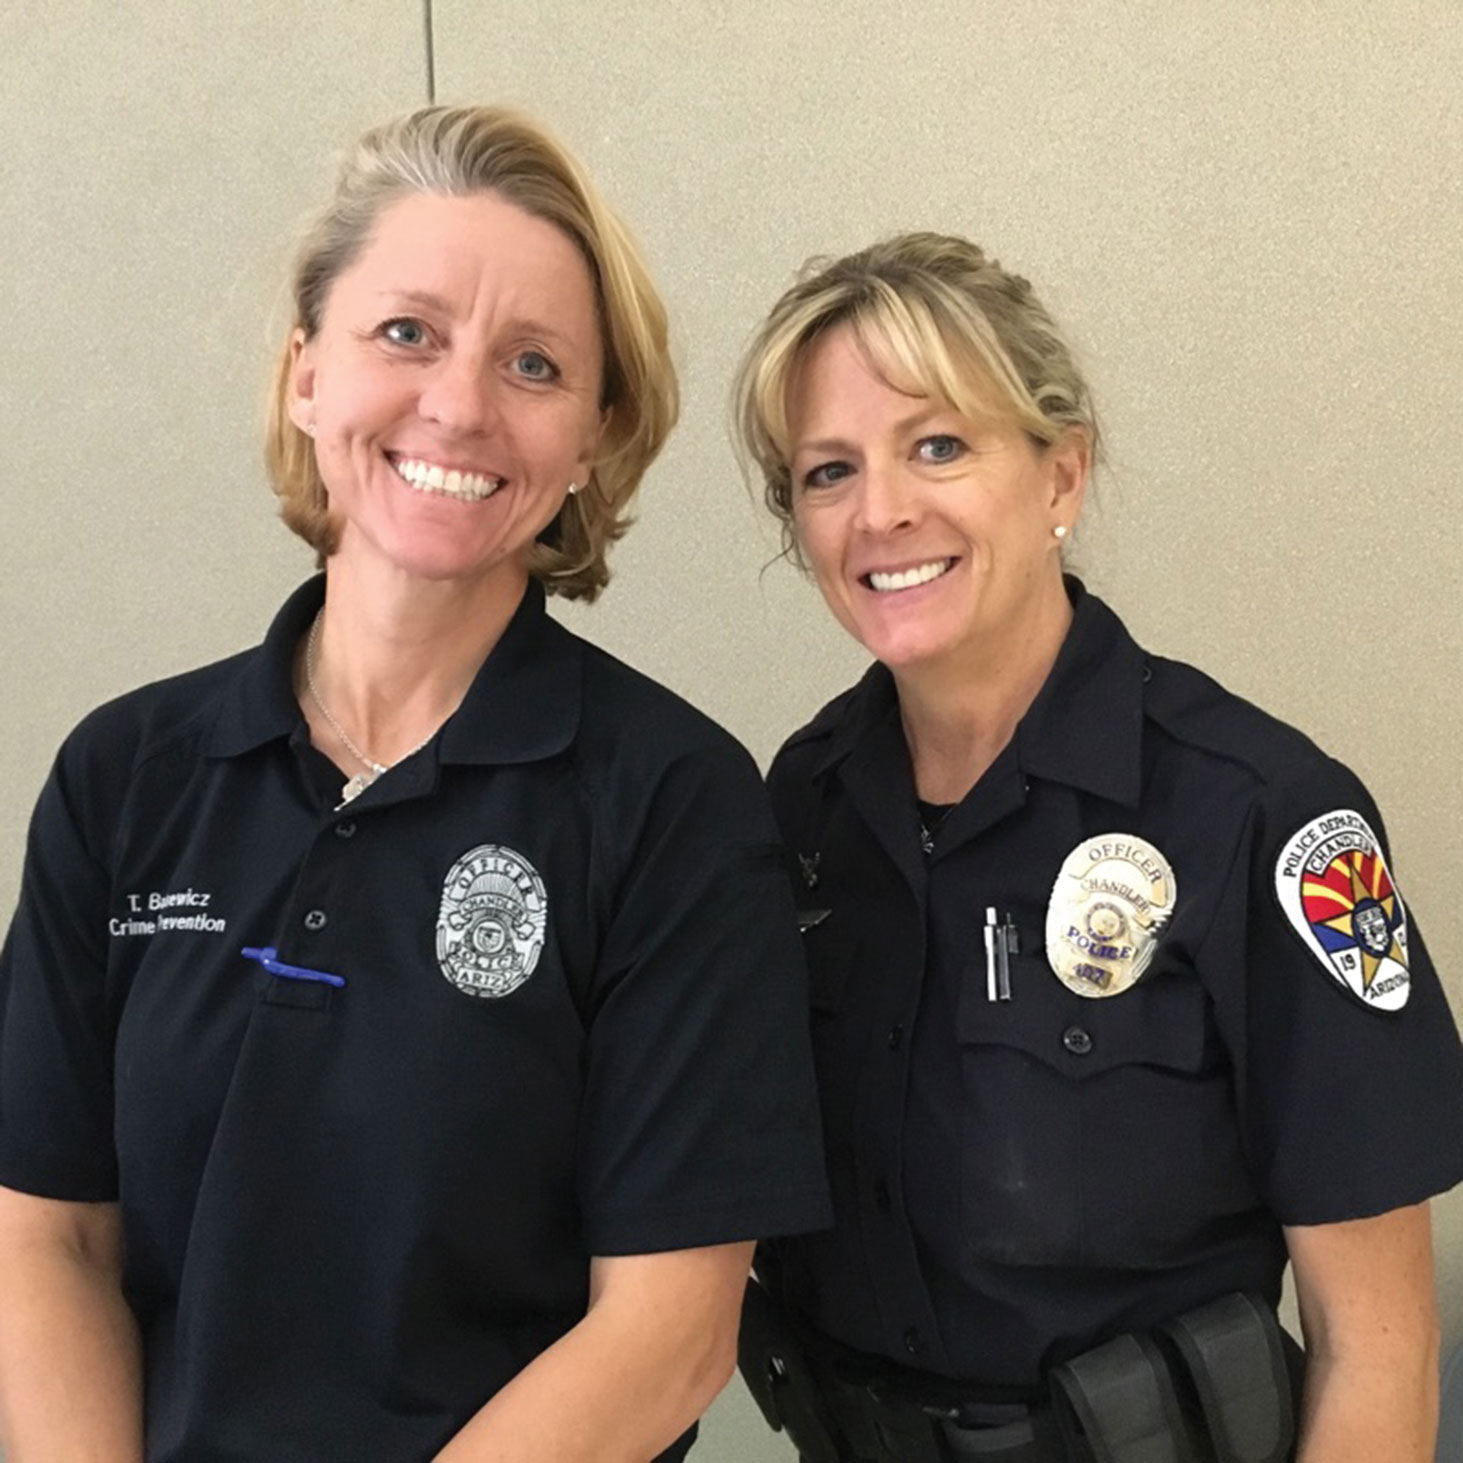 Chandler Police Officers Tina Balsewicz and Robin Atwood